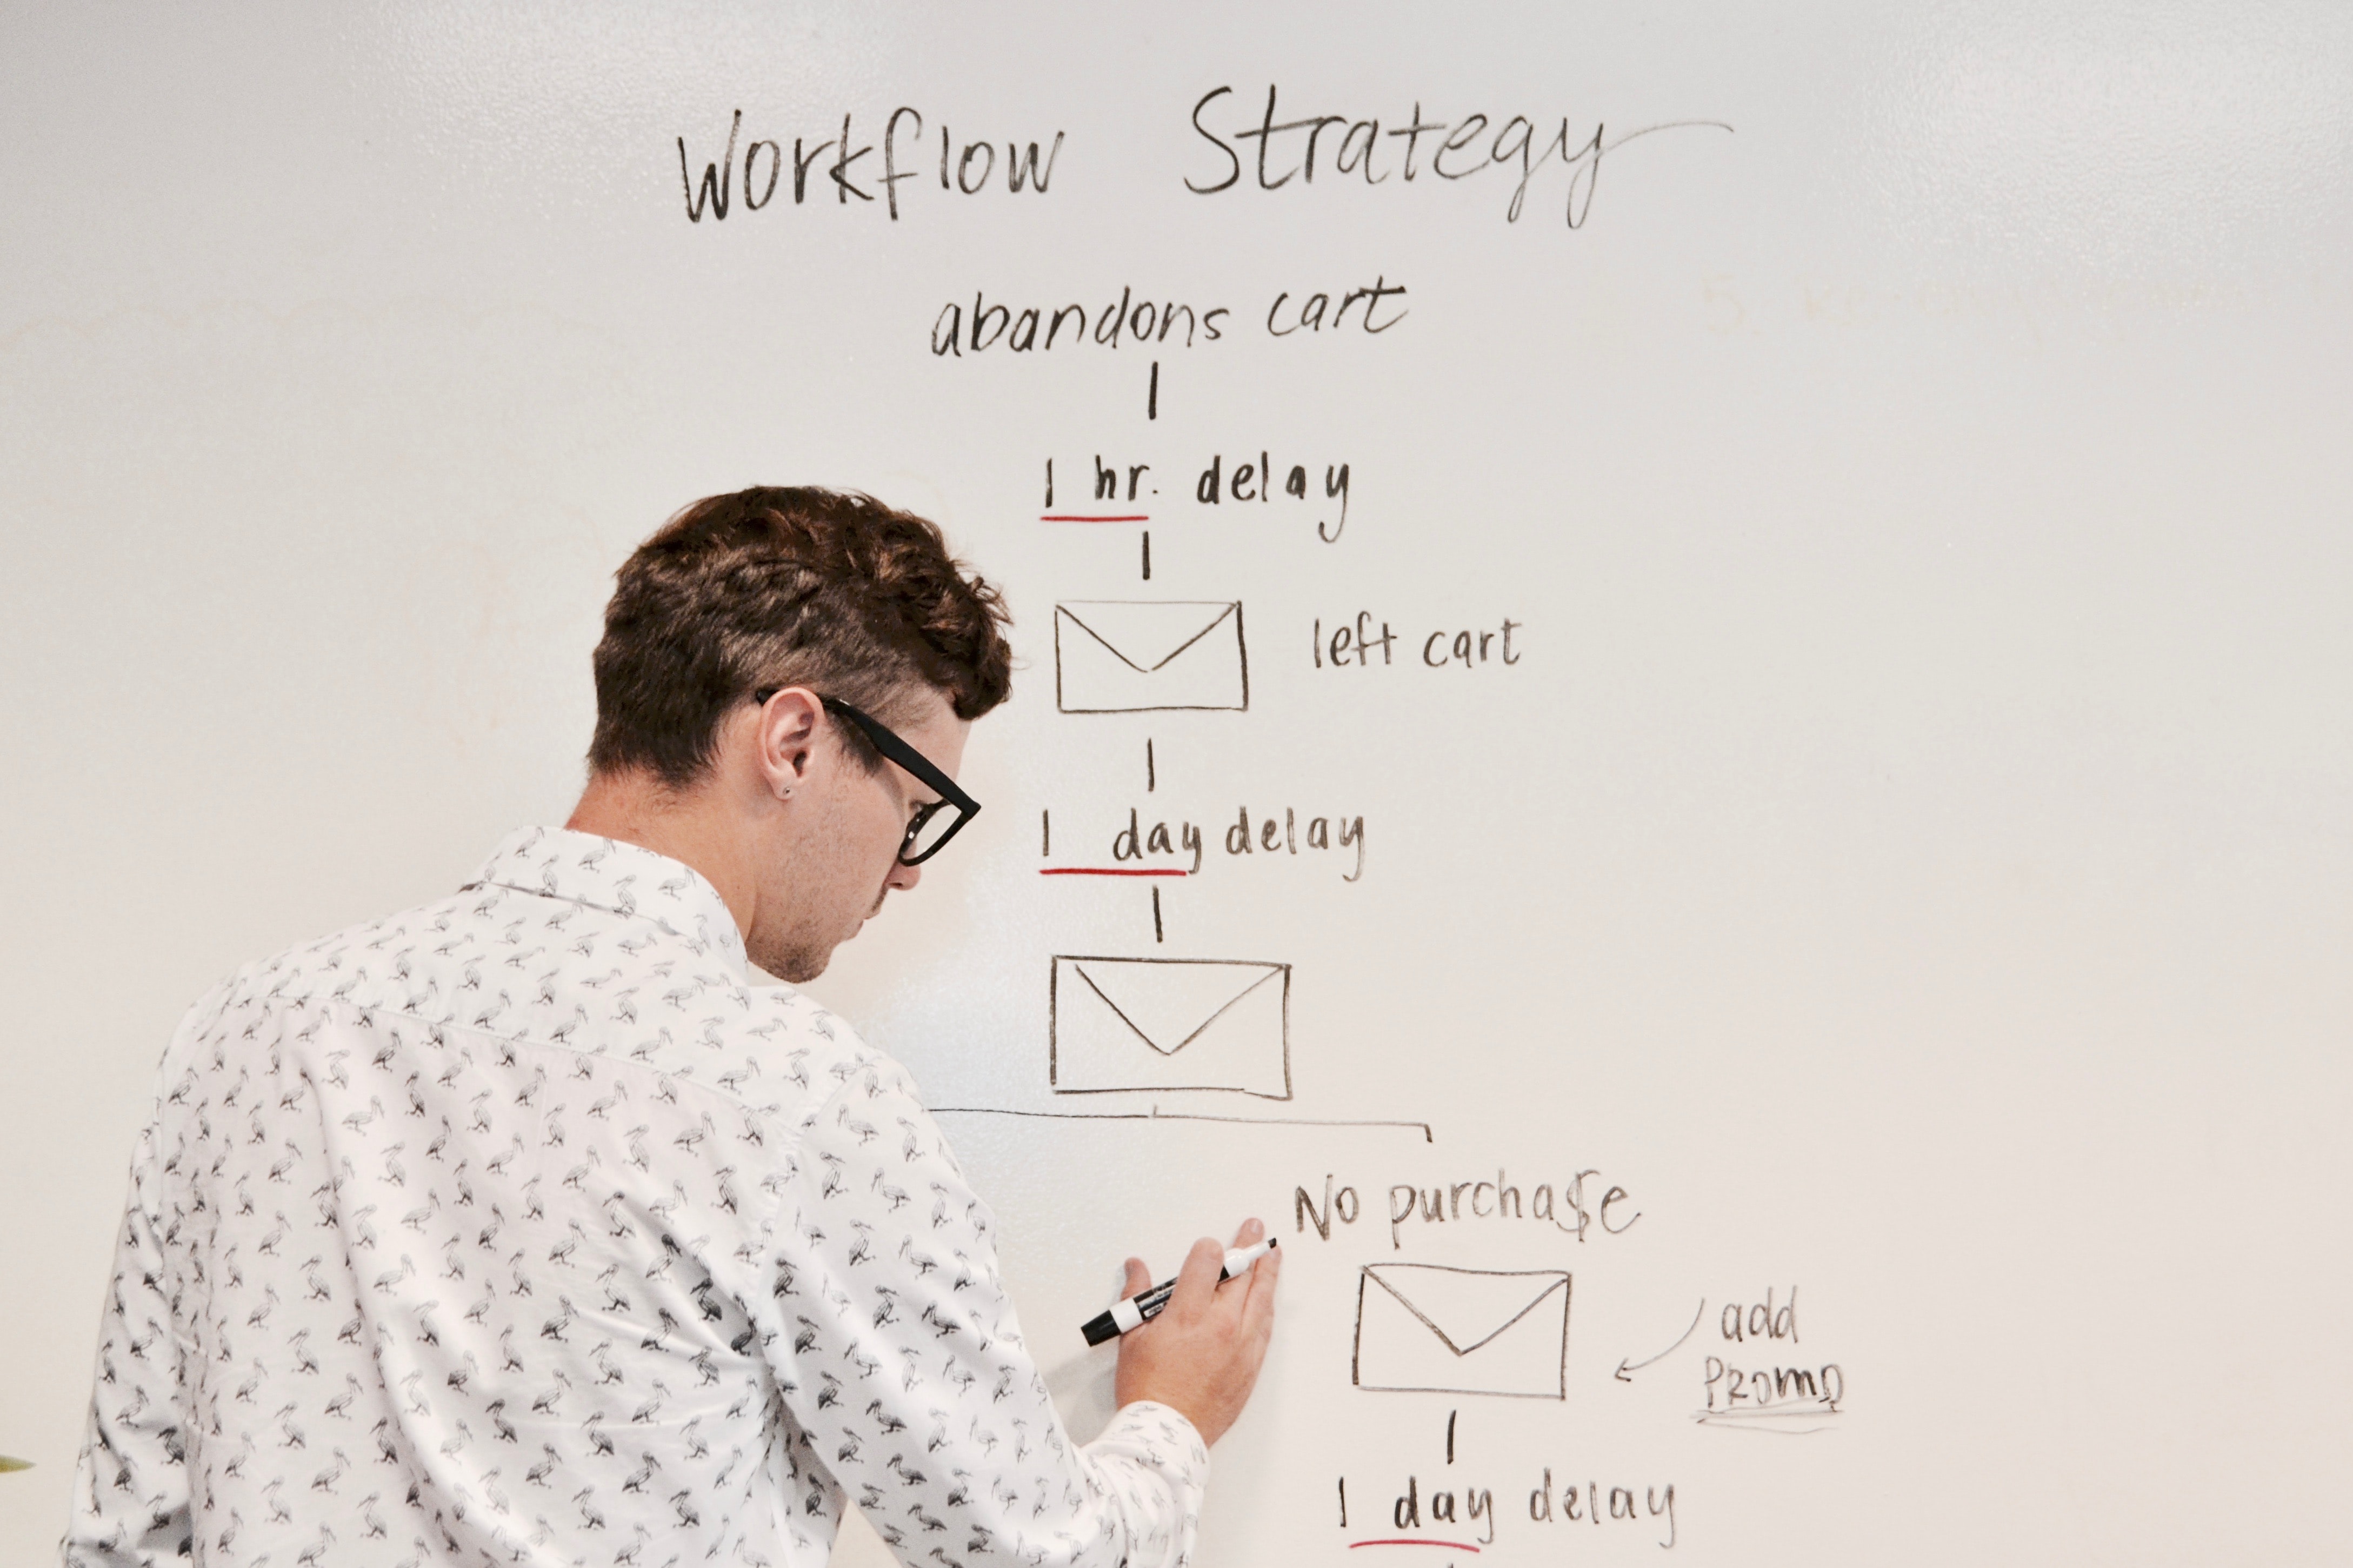 person working on email flows on a whiteboard